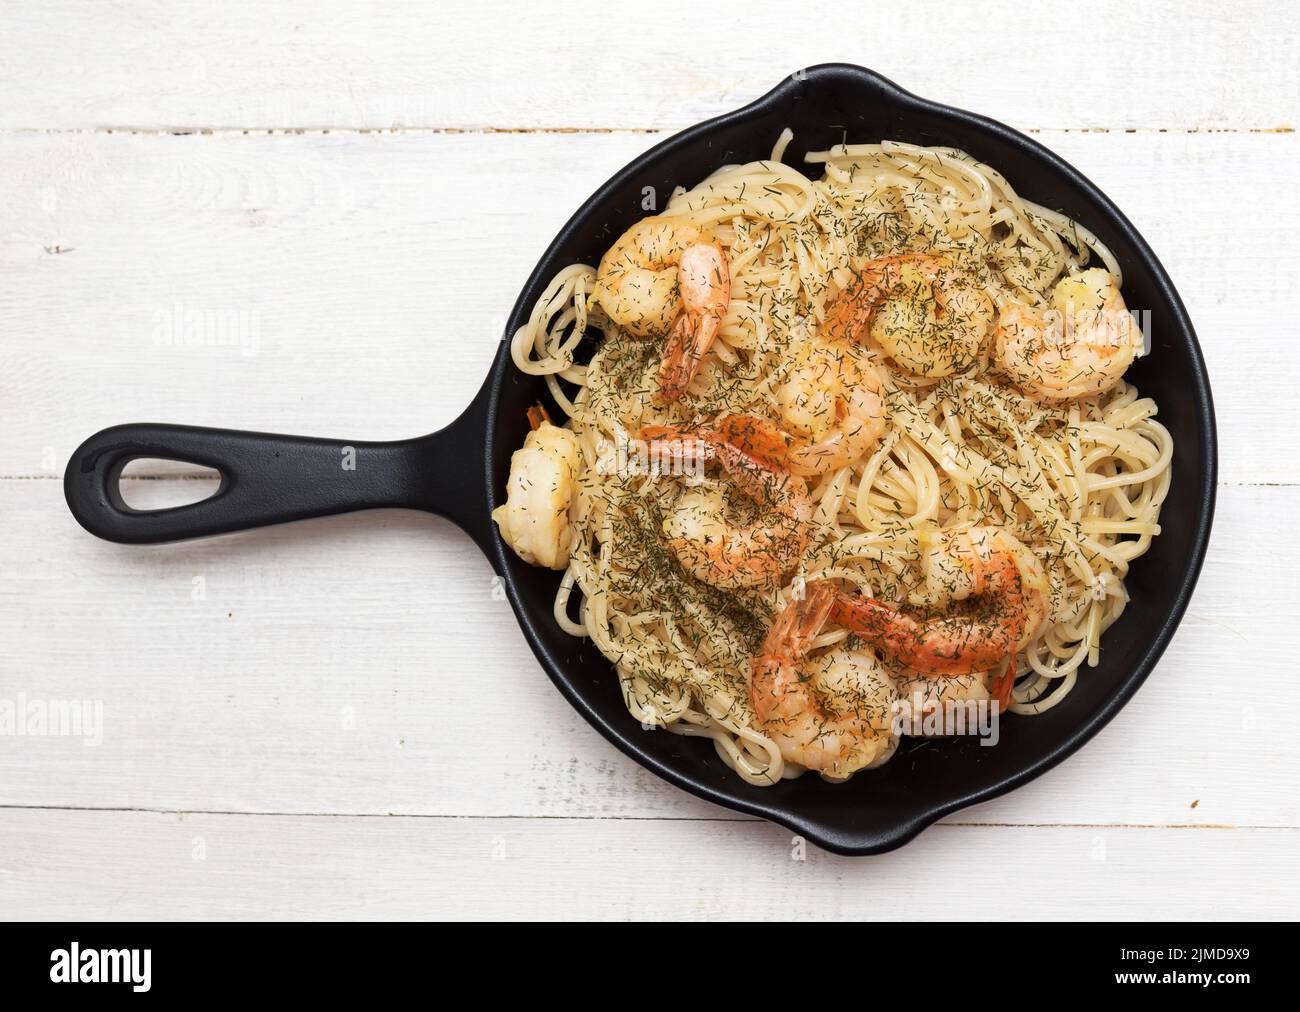 Pasta with shrimps Stock Photo